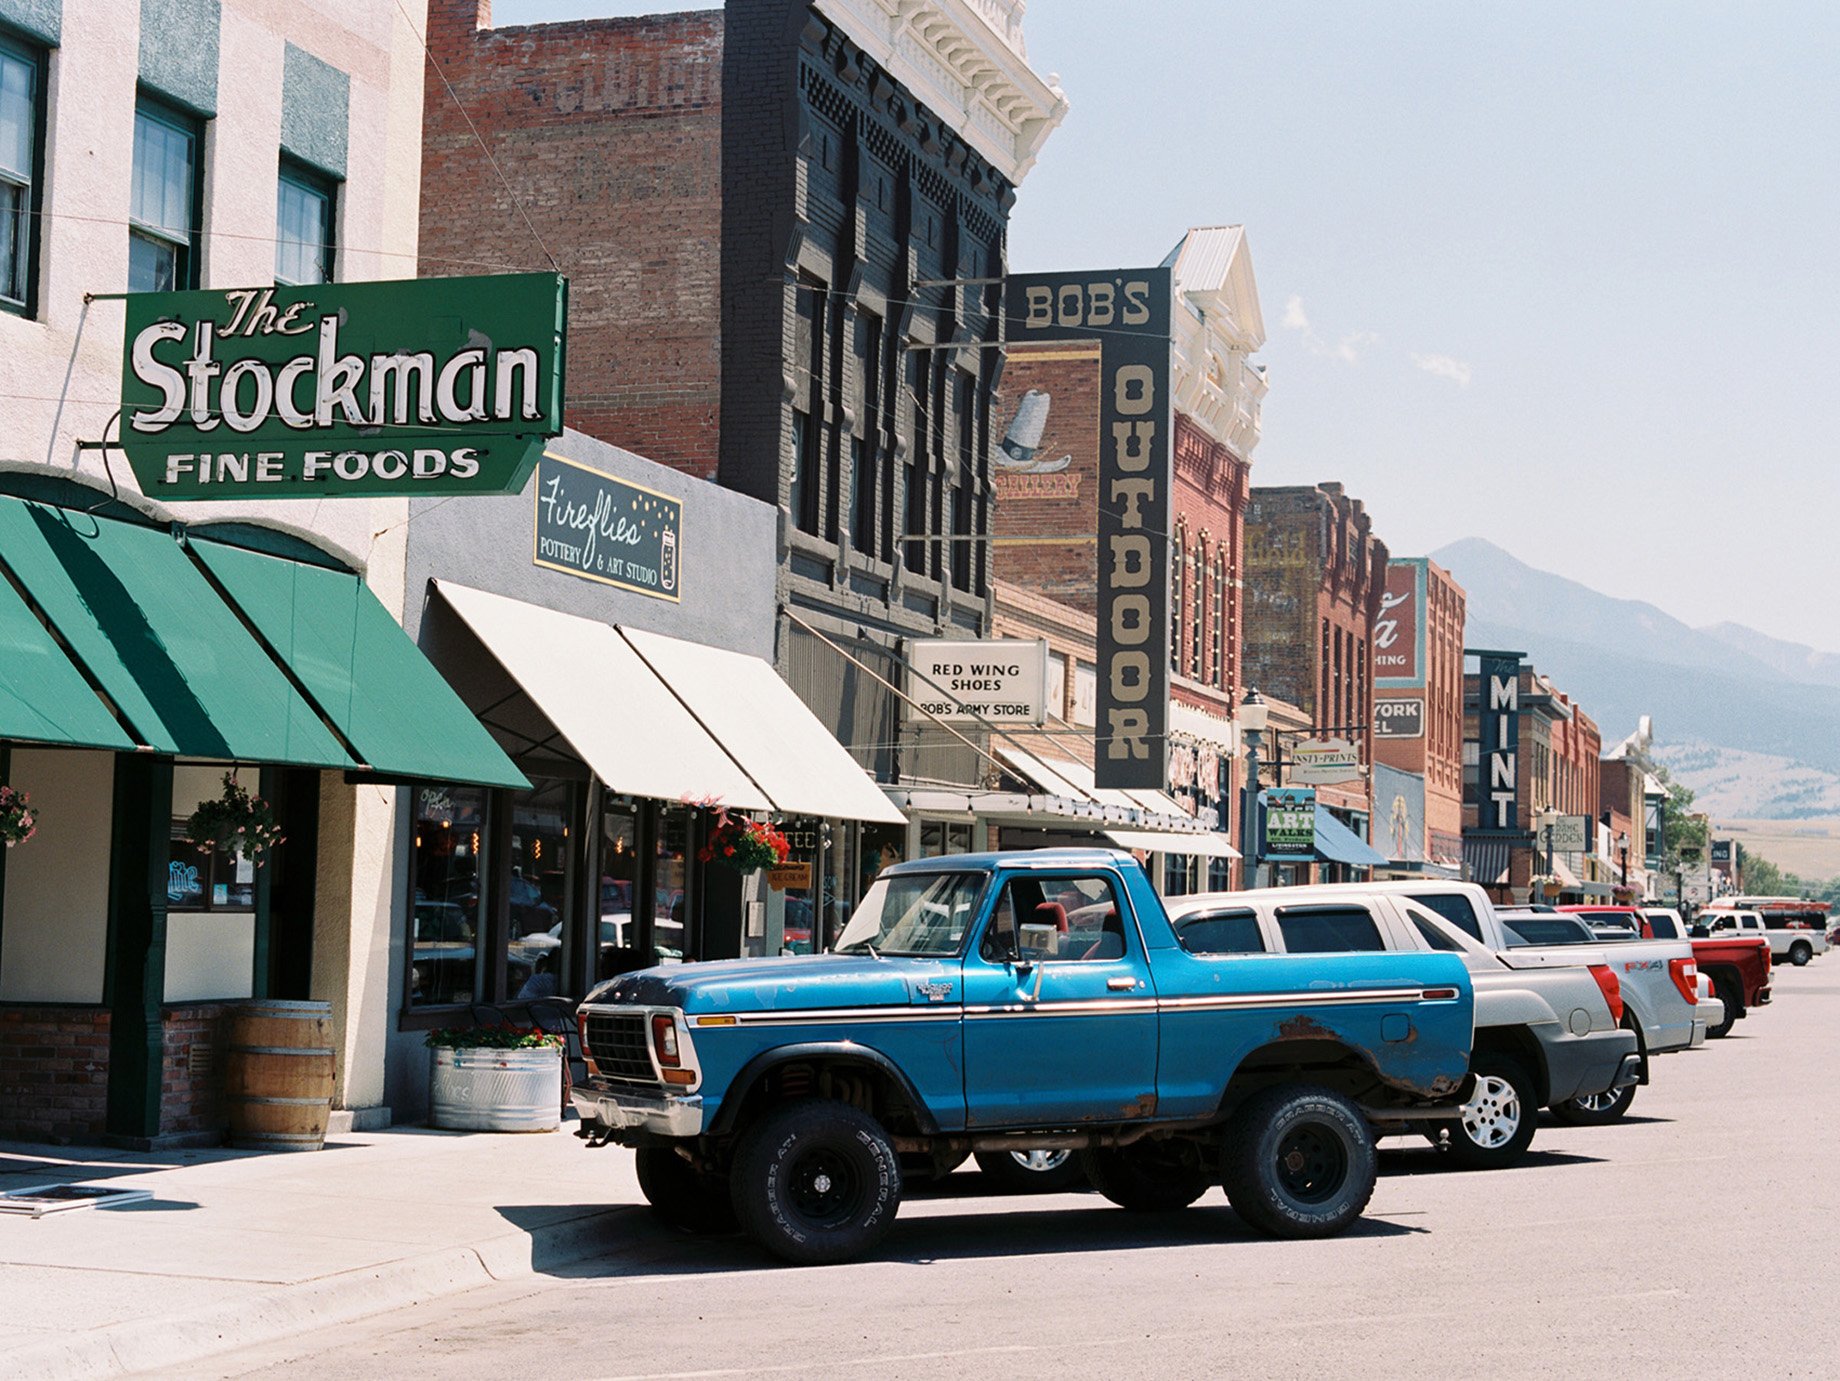 Old car in front of classic western shops in a mountain town in Montana shot by Abigail Bobo for First Opportunity Bank